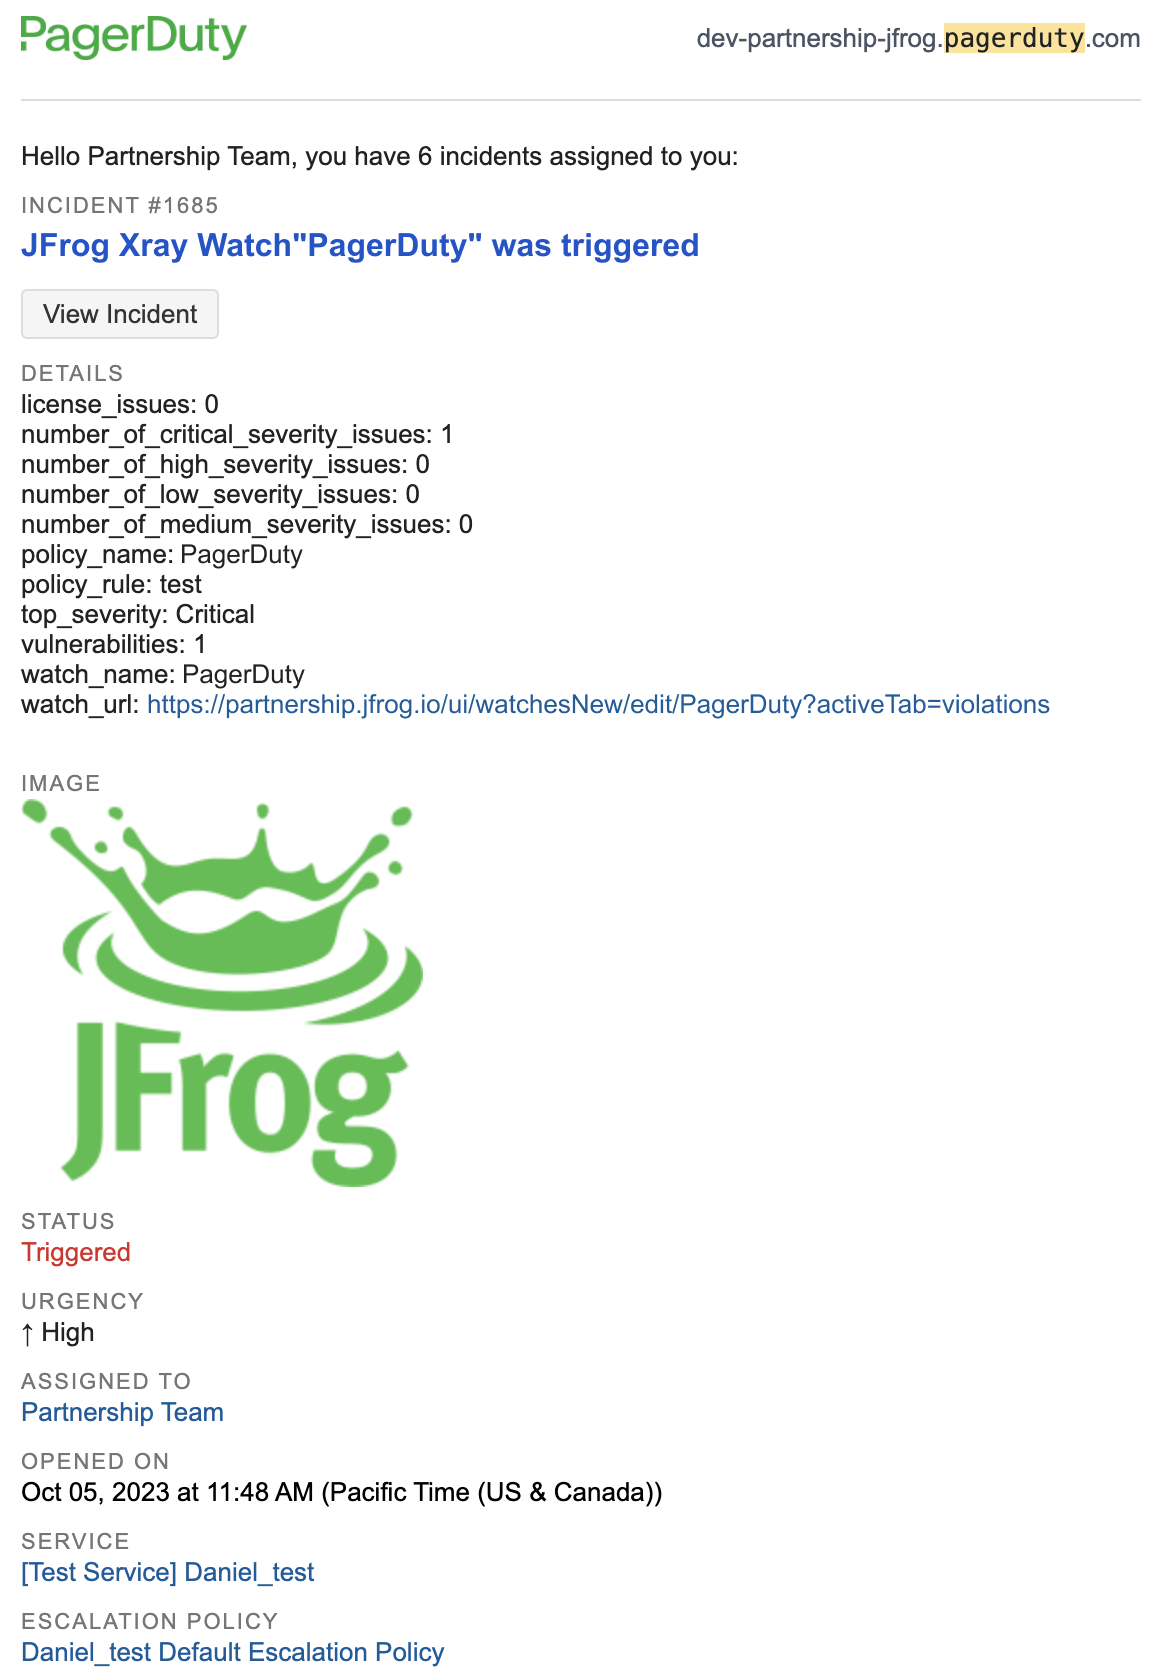 PagerDuty incident notification with a JFrog Xray Watch Violation summary and deep link to JFrog for complete details